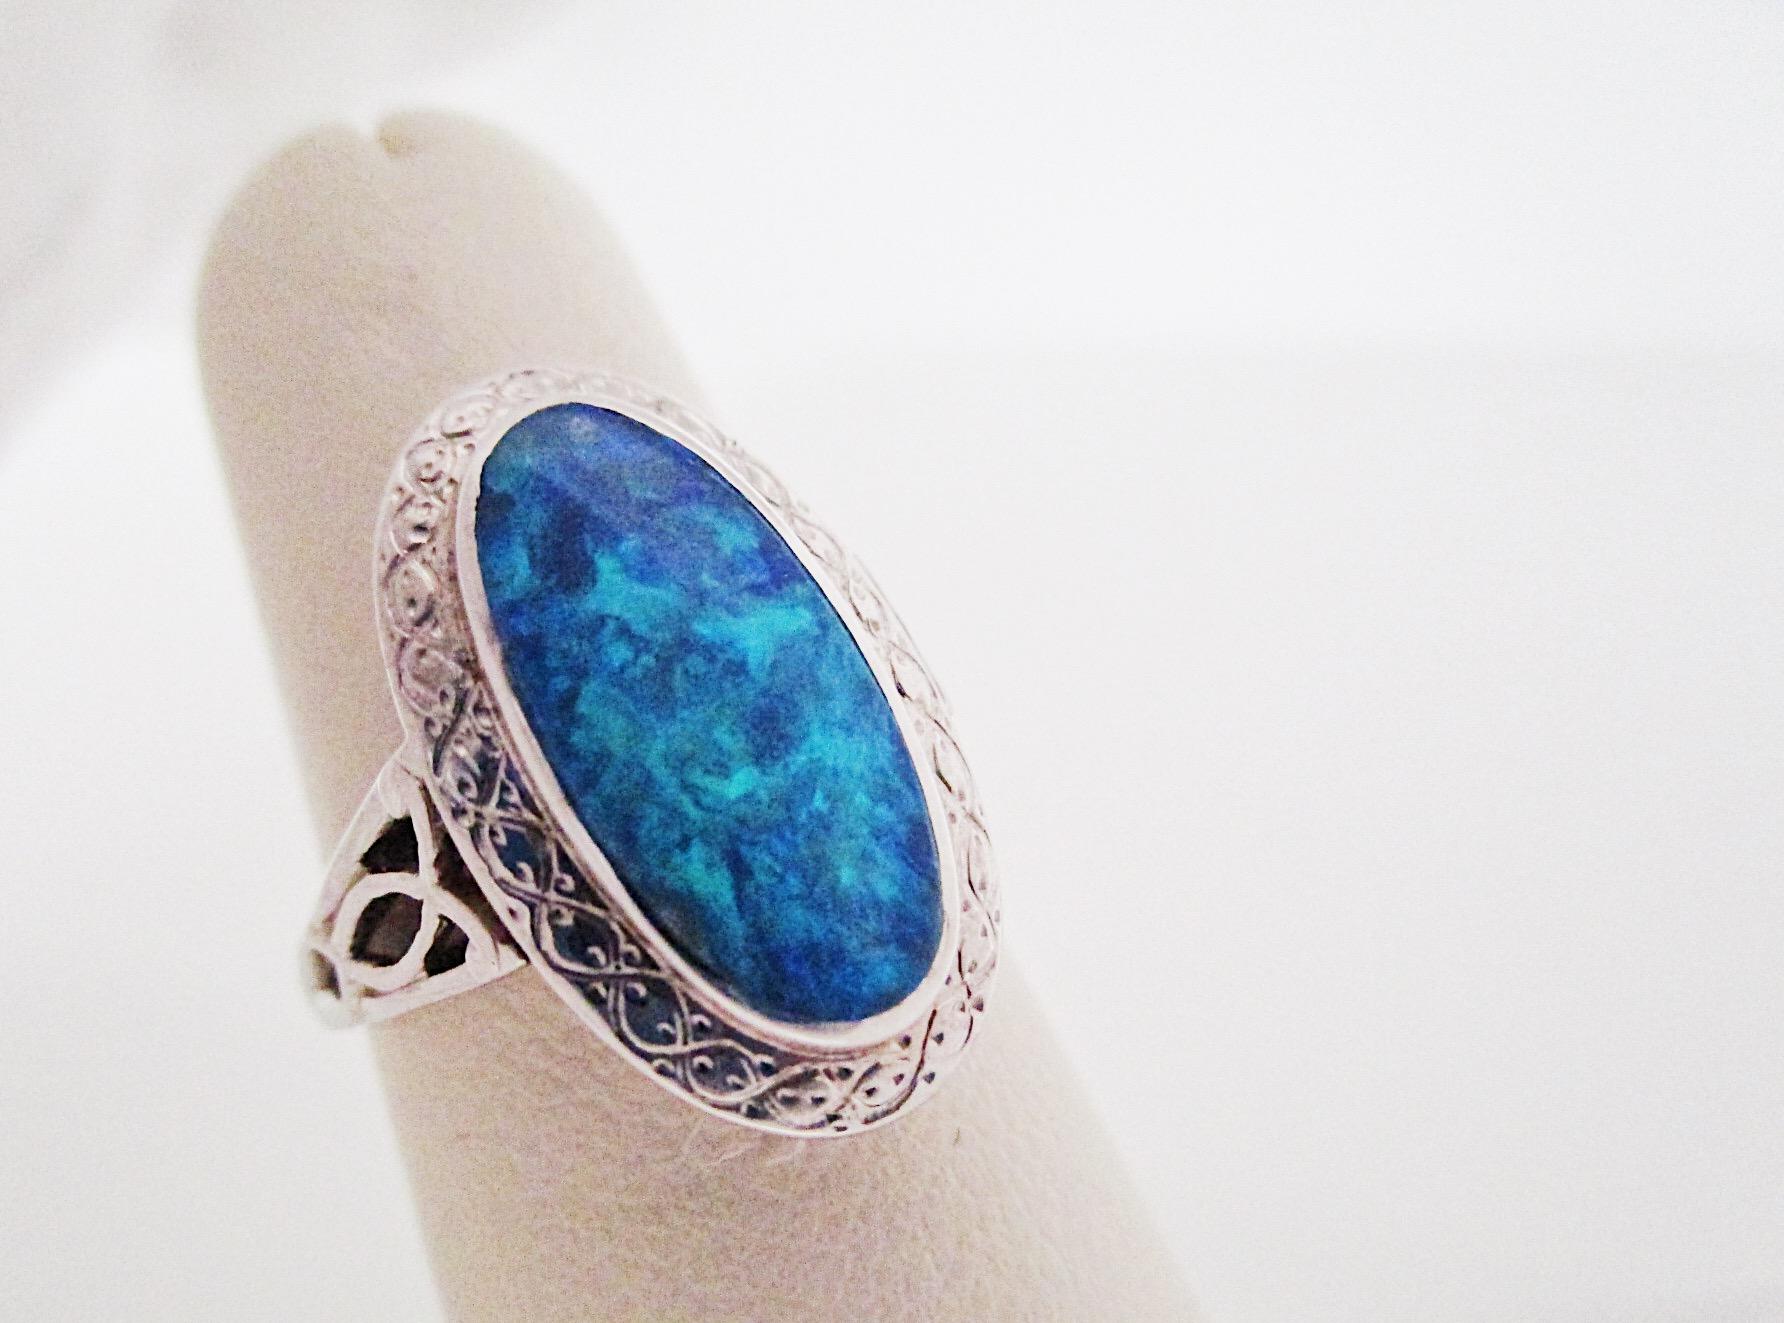 This is an excellent example of Black Opal set in 14K white gold. There is lovely scroll-work around the bezel that will protect the opal from damage. October babies will love the vibrant blue with green flashes, actually anyone would love